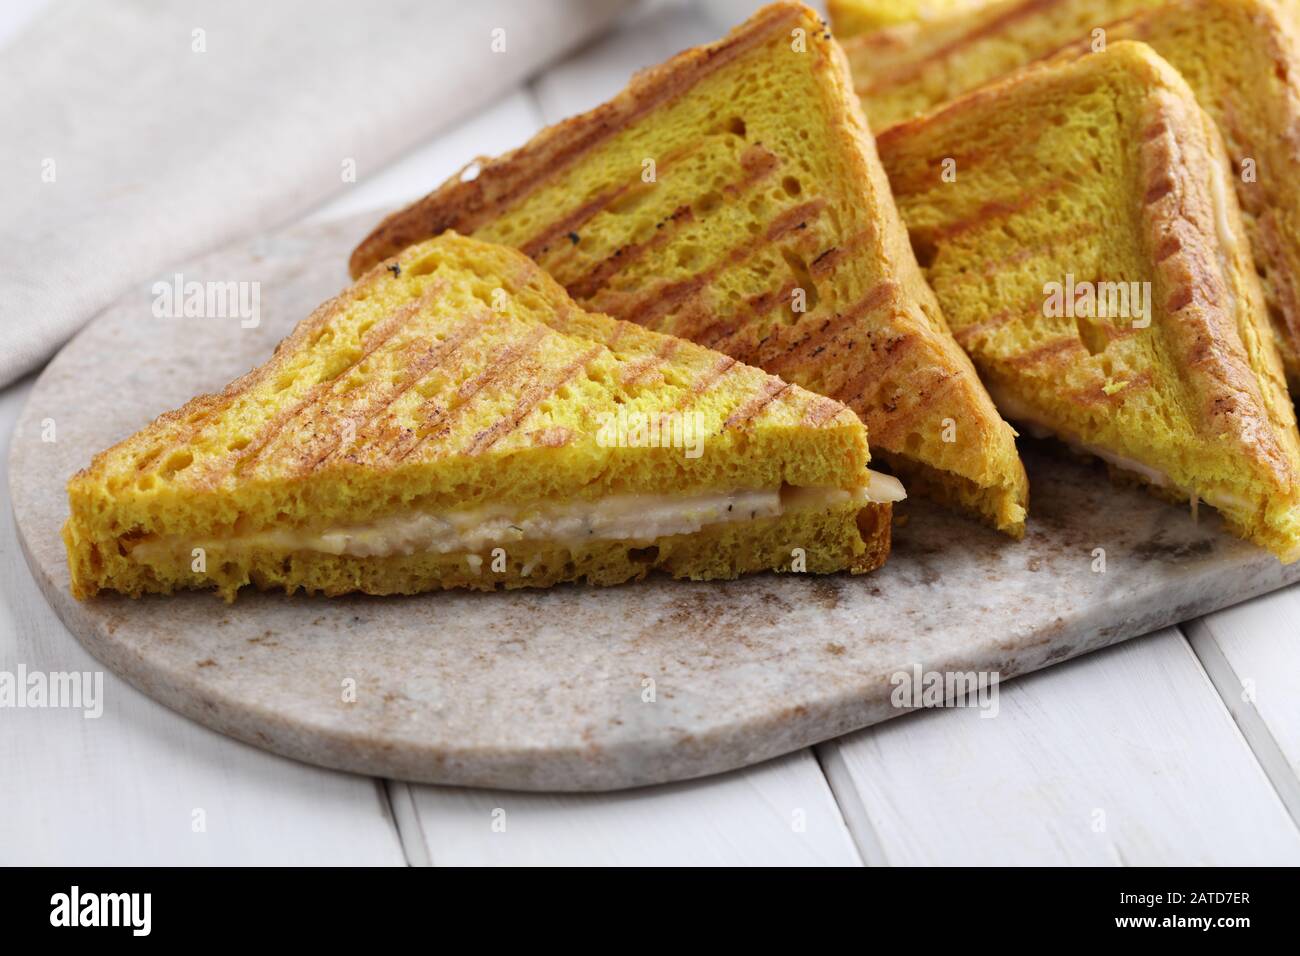 Grilled sandwiches with ham and cheese on a marble cutting board. Toast bread with curcuma gives a bright yellow color Stock Photo